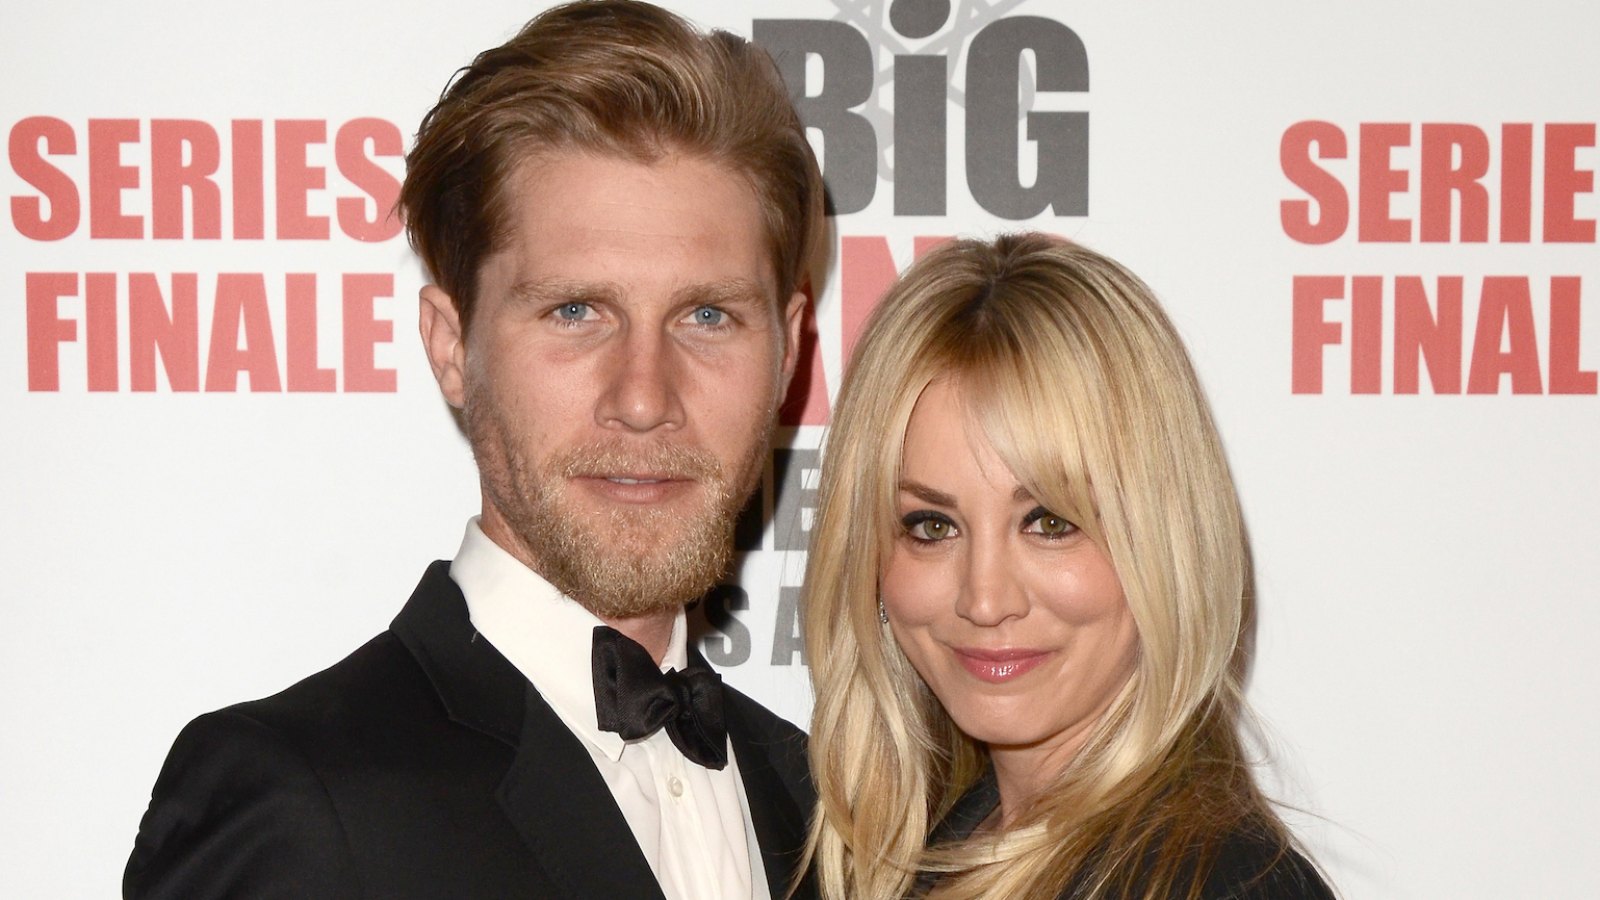 Kaley Cuoco’s Husband Karl Cook Calls Her the ‘Most Amazing Woman on the Planet’ in Birthday Message